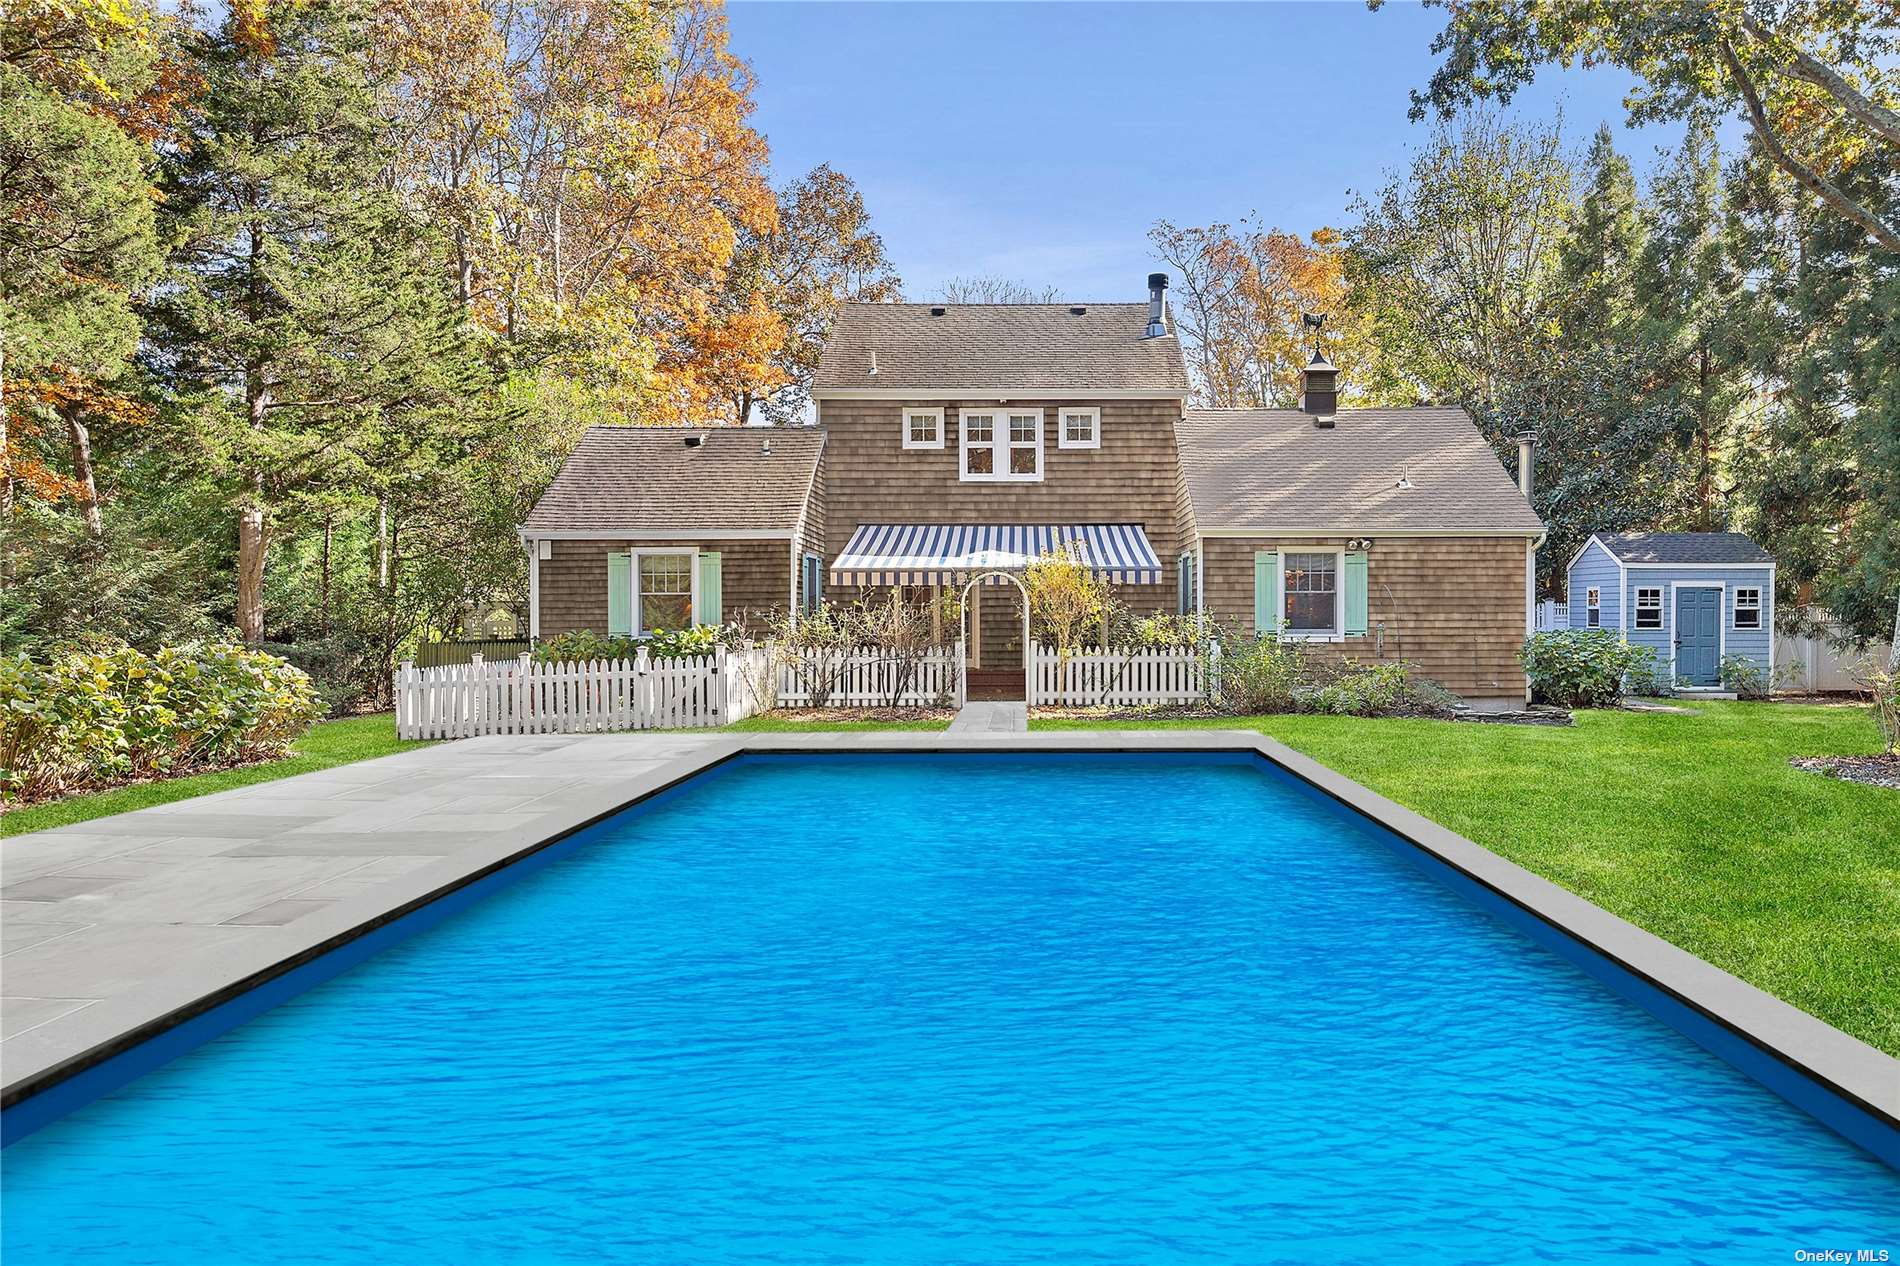 a view of a house with a swimming pool with a yard